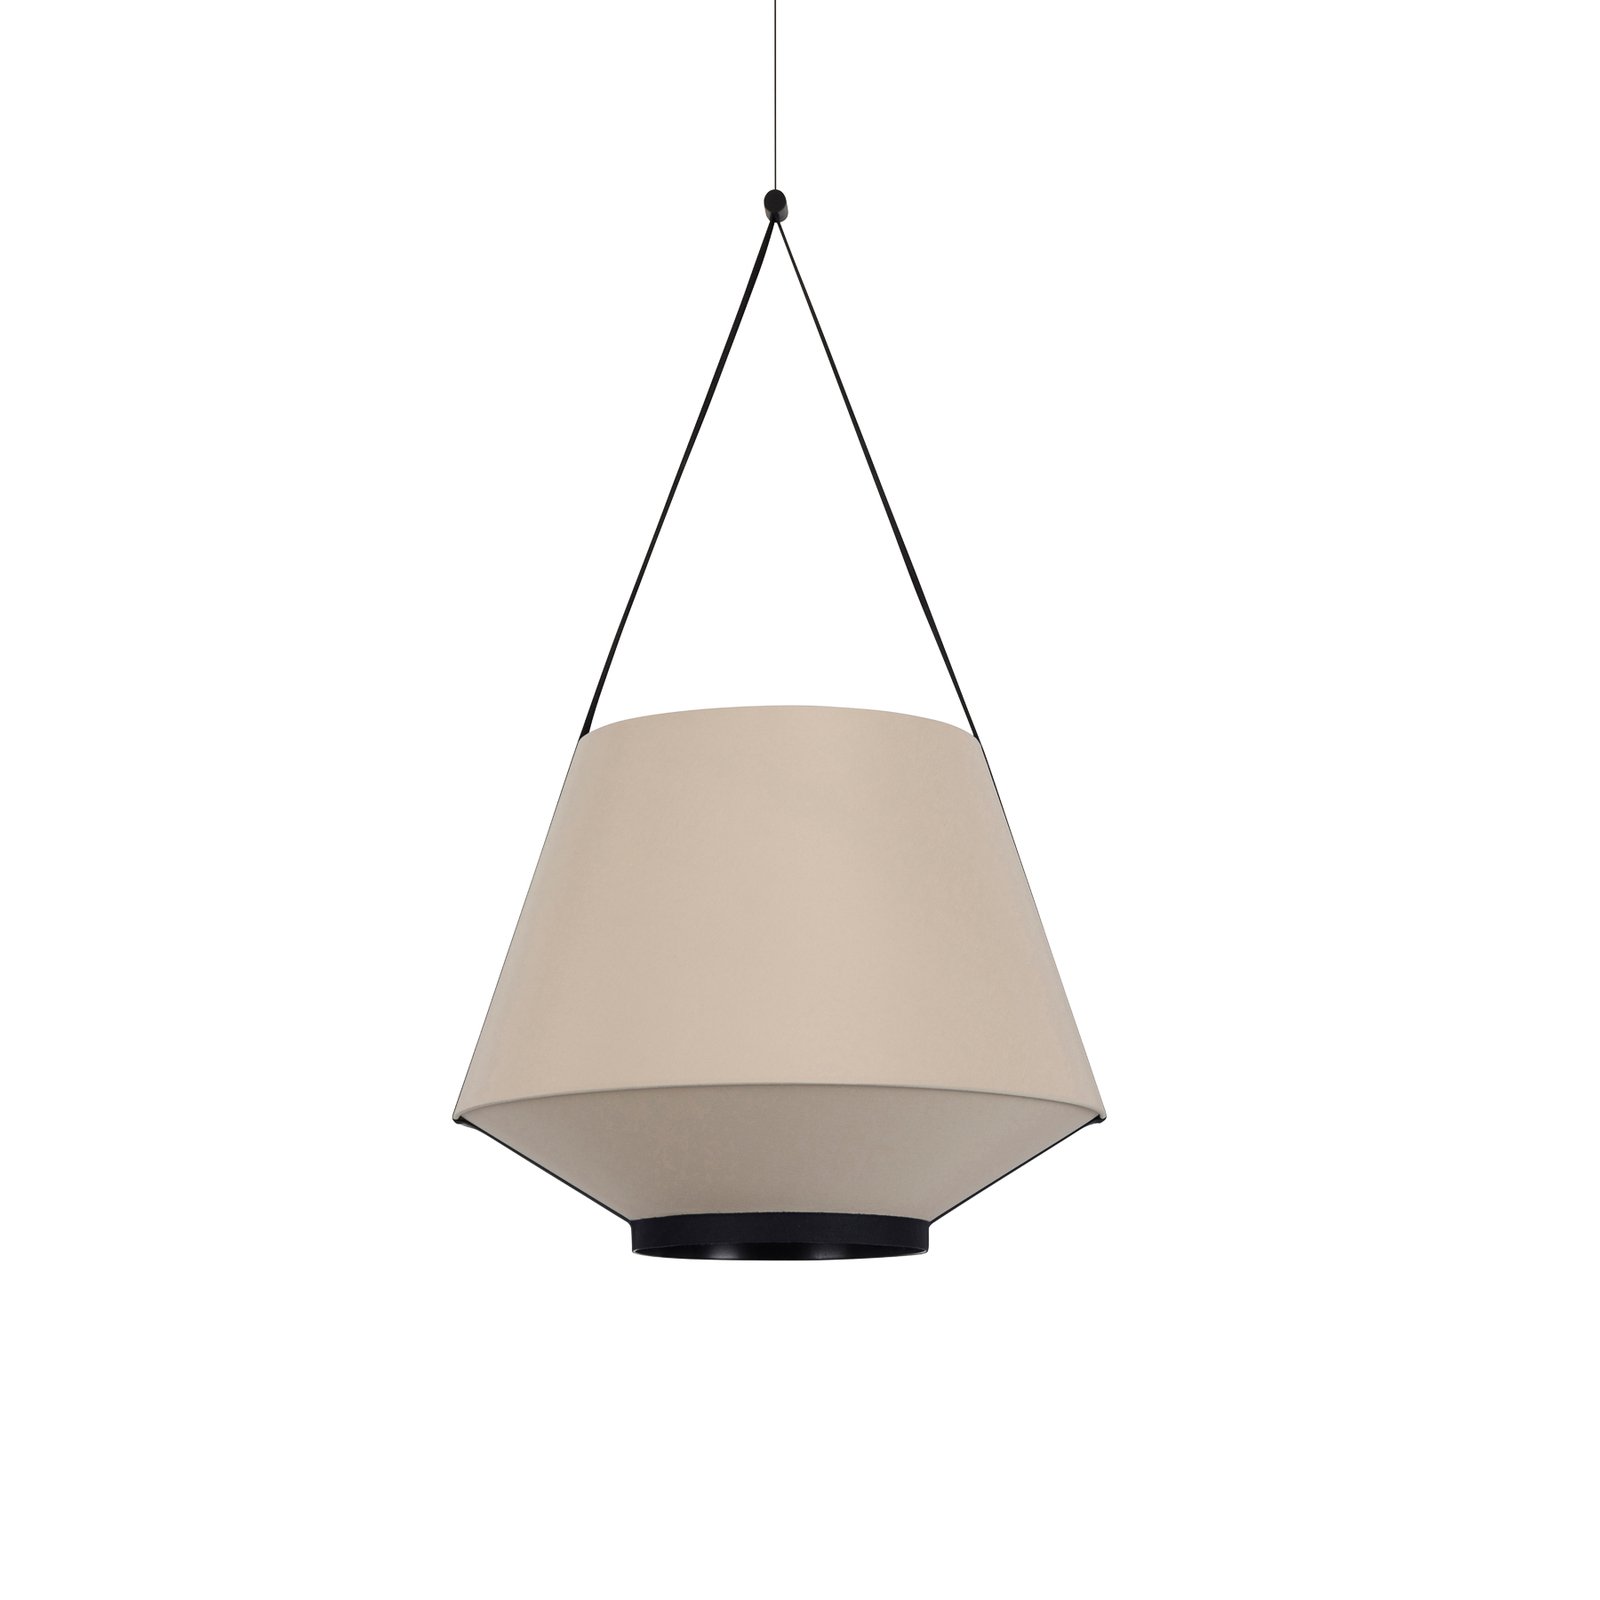 Forestier Carrie S hanglamp, zand